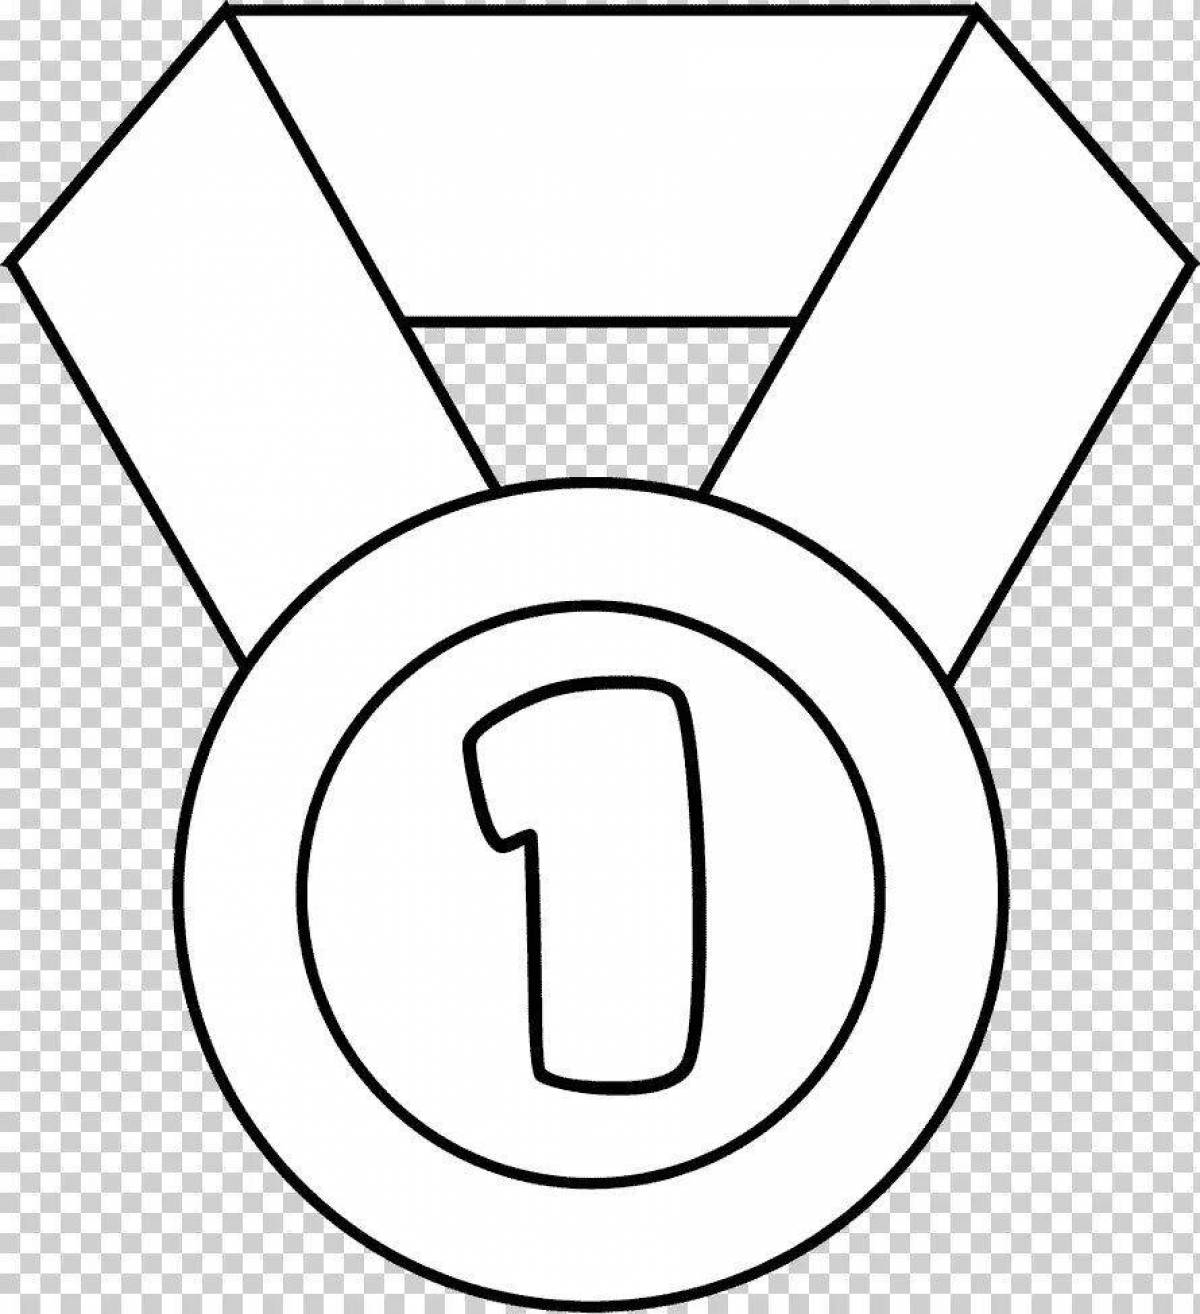 Coloring page wild medal for 1st place